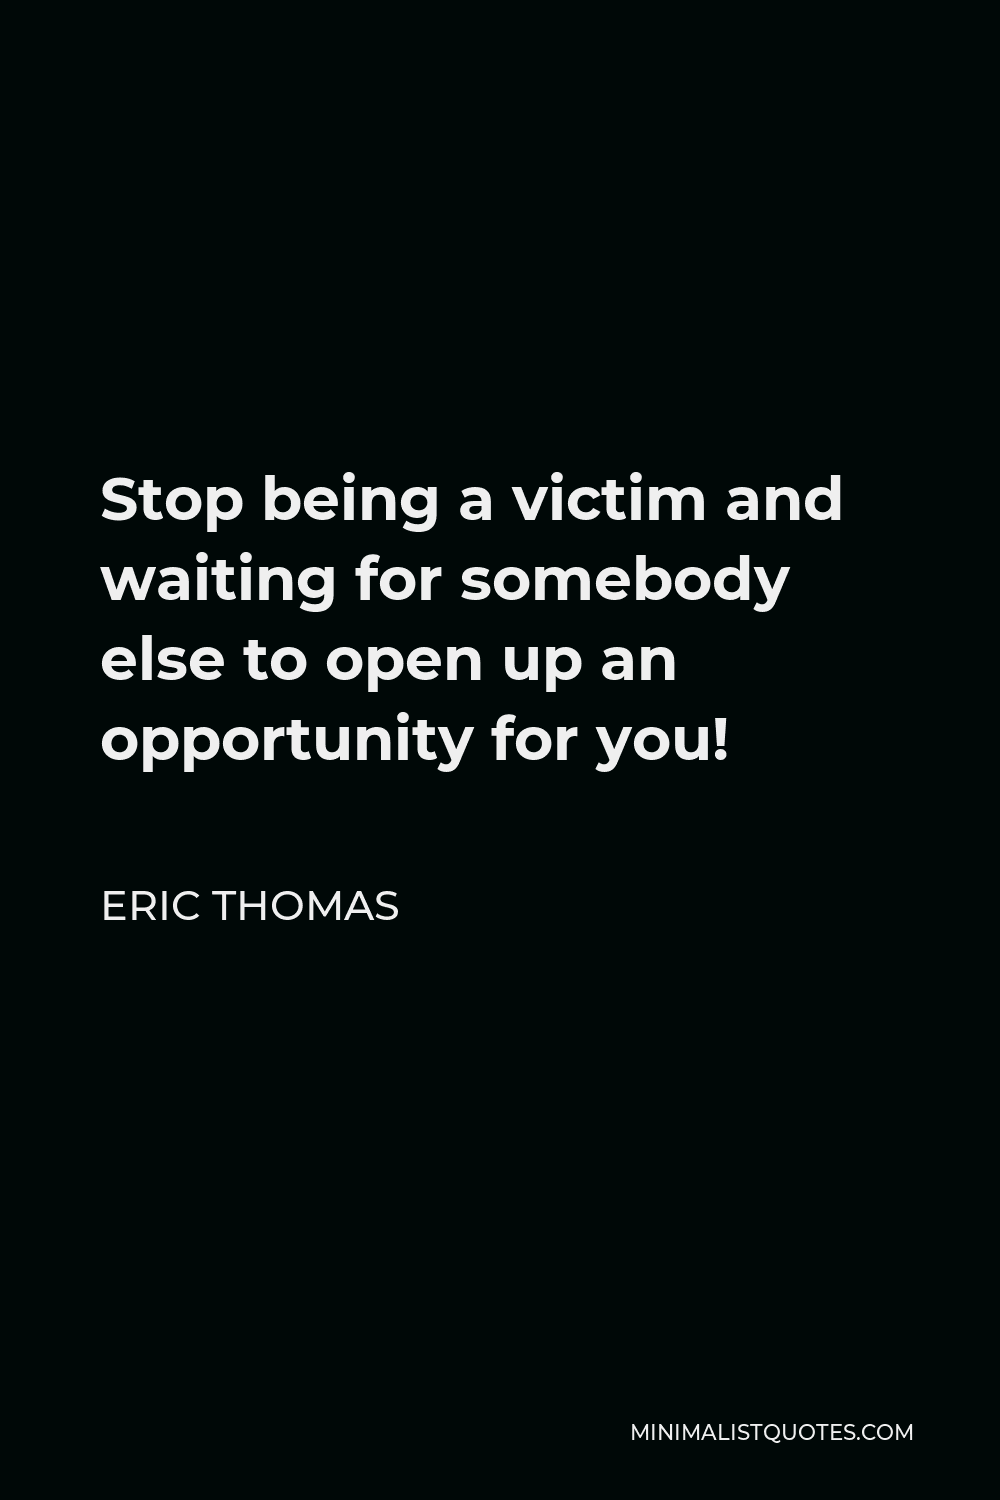 Eric Thomas Quote - Stop being a victim and waiting for somebody else to open up an opportunity for you!